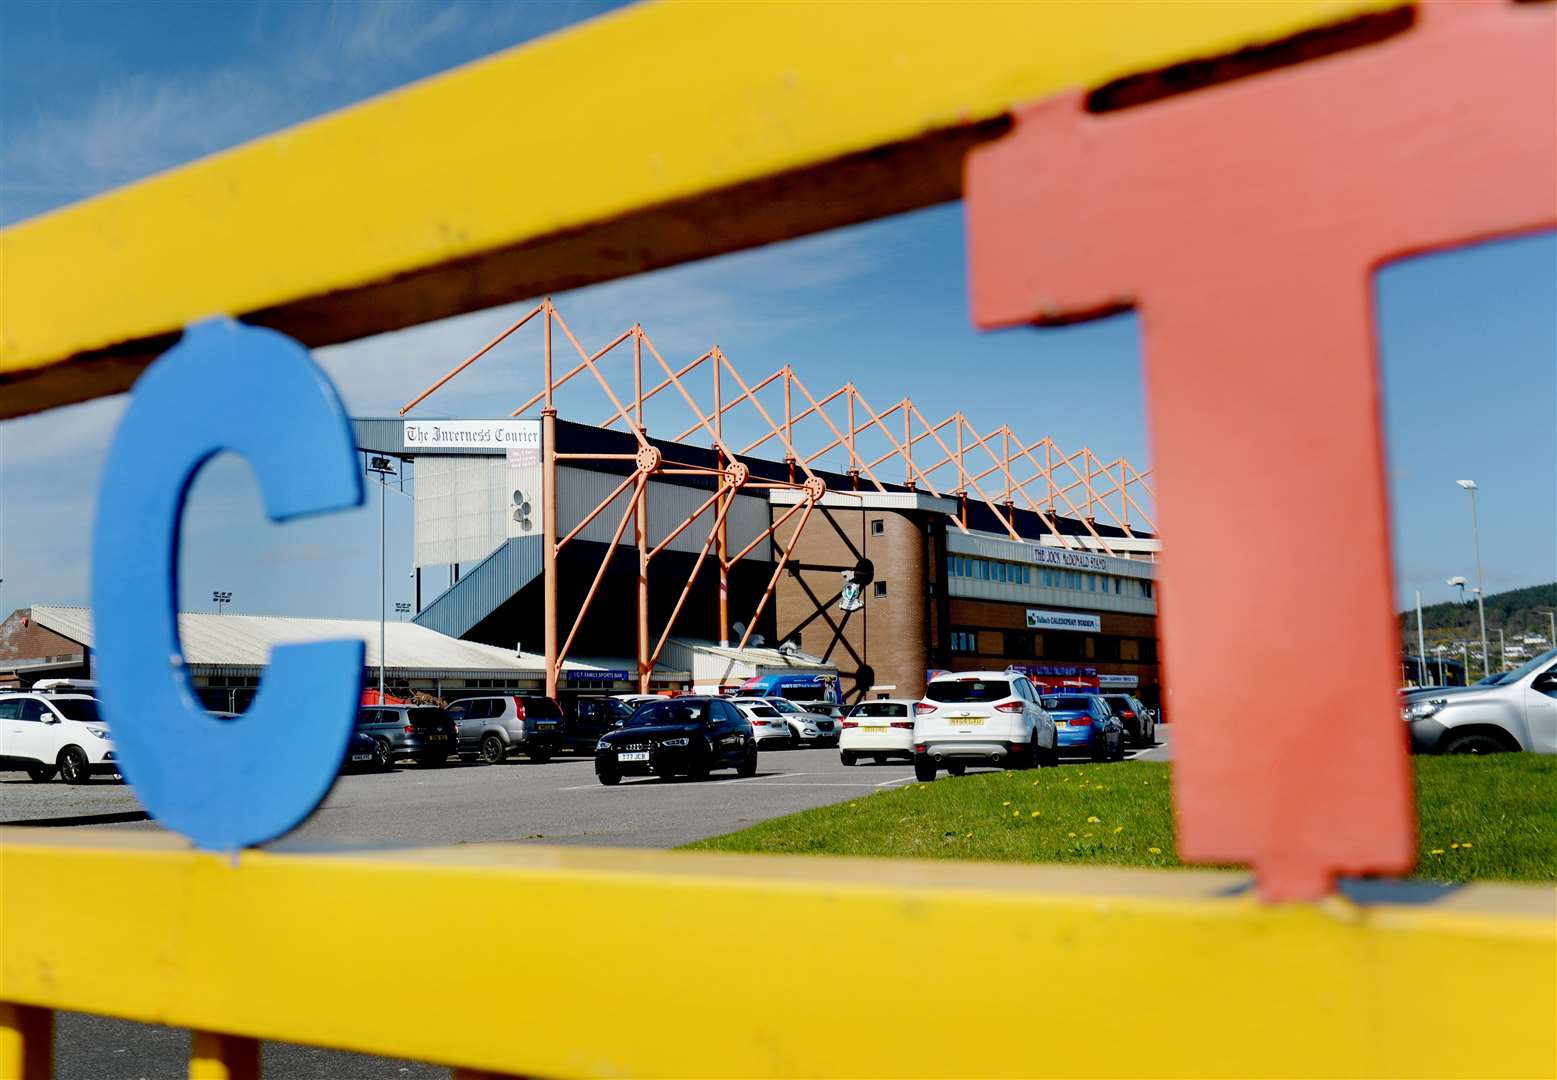 Caledonian Stadium, the home of Inverness Caledonian Thistle.